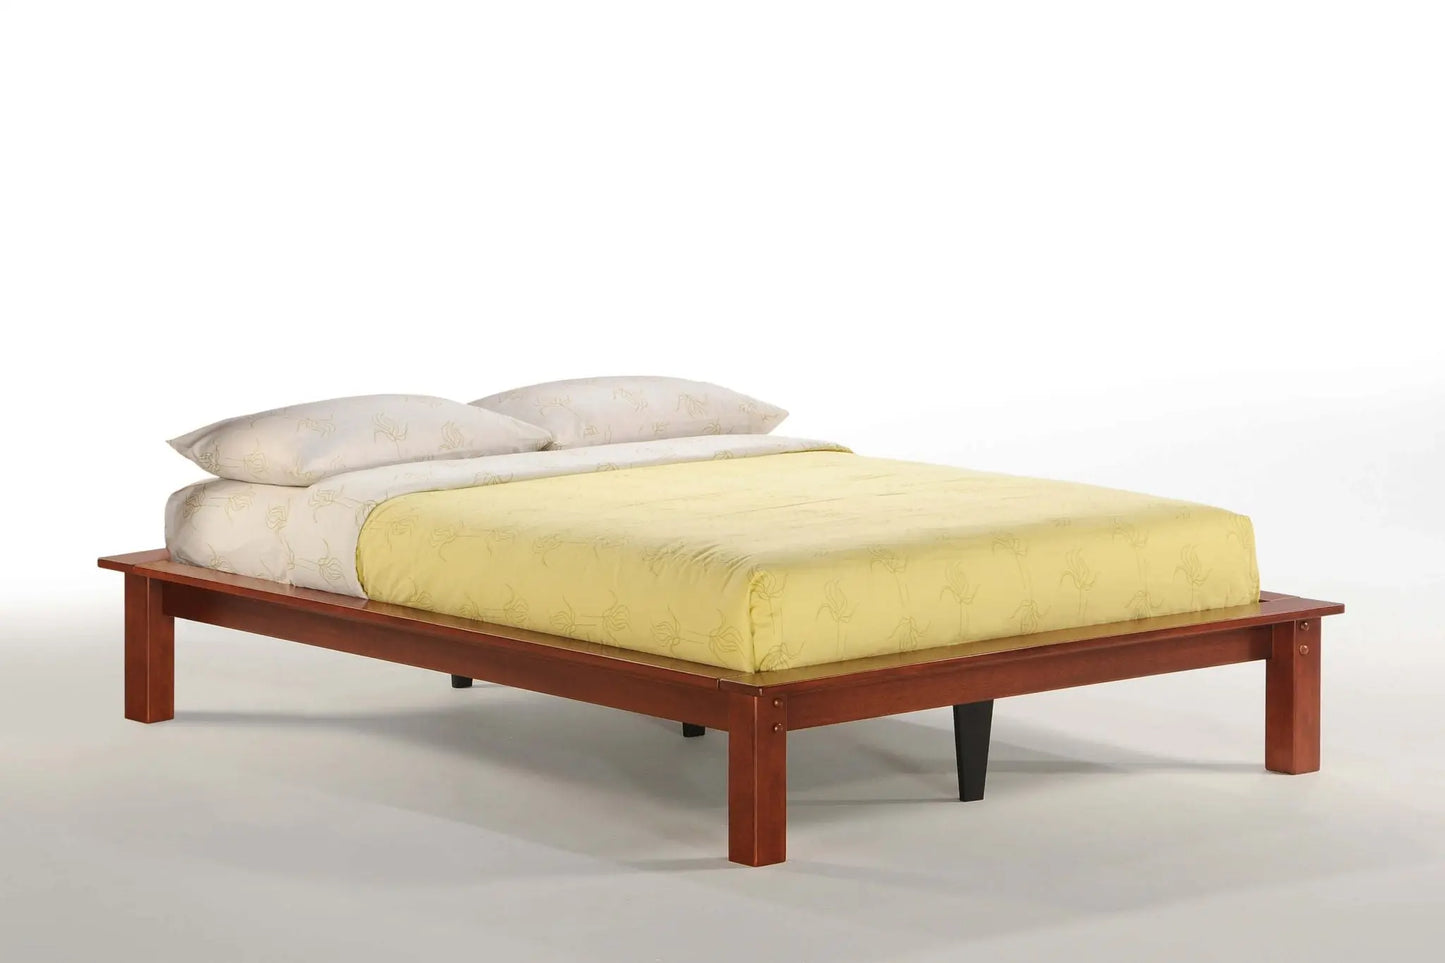 CARMEL BASIC BED night and day furniture